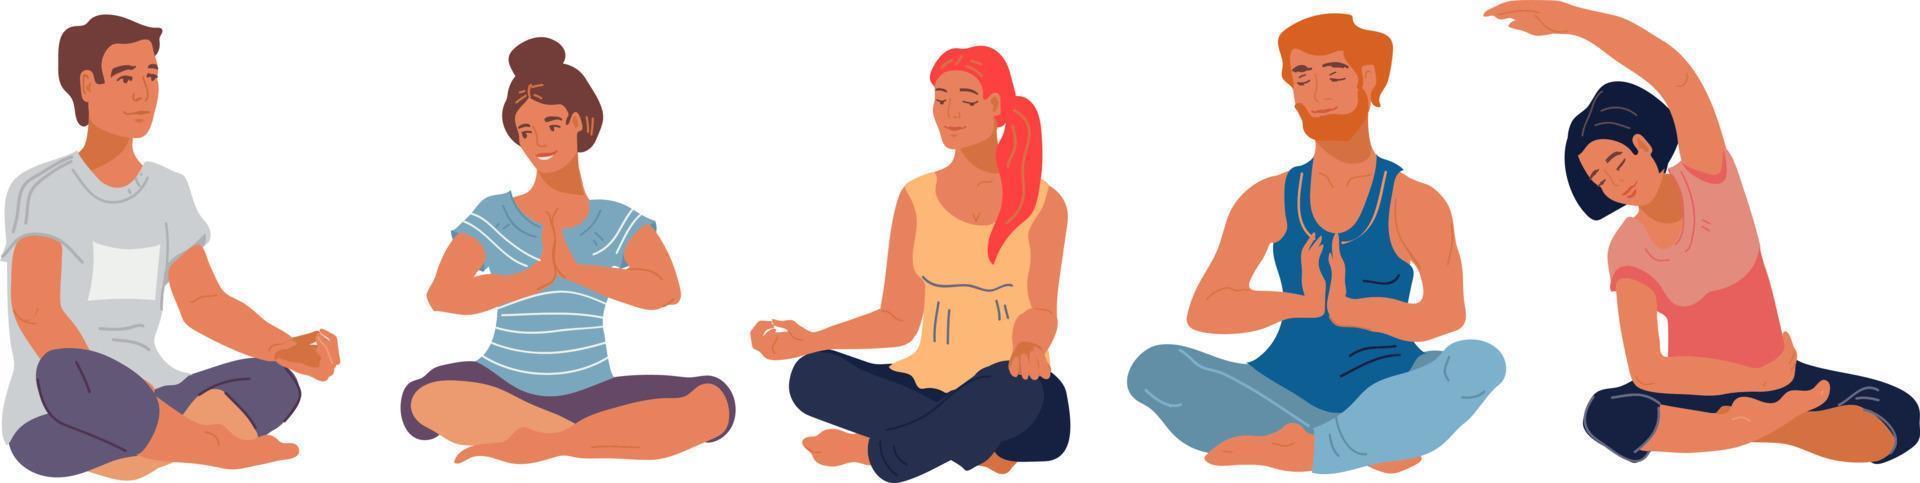 People in sportswear sitting in the relaxing meditative pose at yoga class. Flat vector illustration isolated on the white background. Men and women wellness and yoga banner.